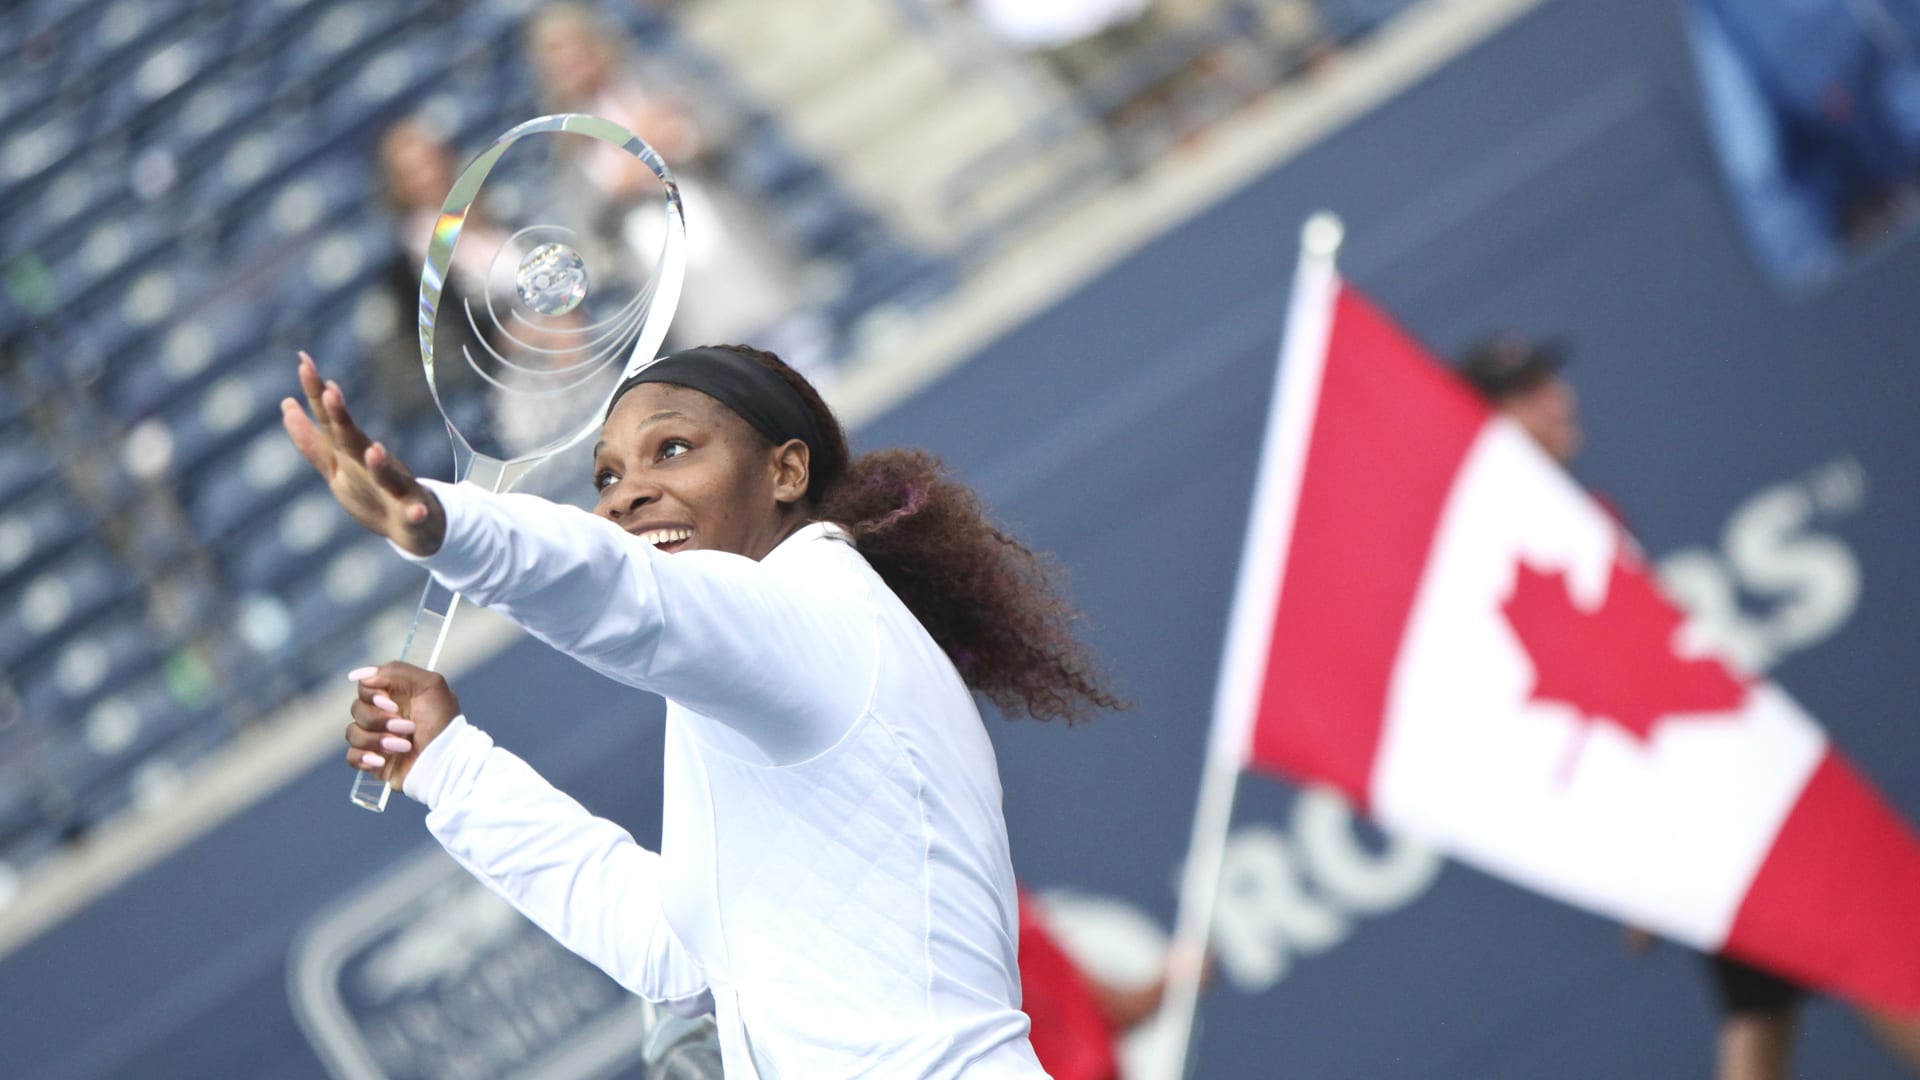 Serena is striking a clean ball these days and it just warms my soul -  Tennis fans react to Serena Williams and Venus Williams practicing together  ahead of Canadian Open 2022for title?